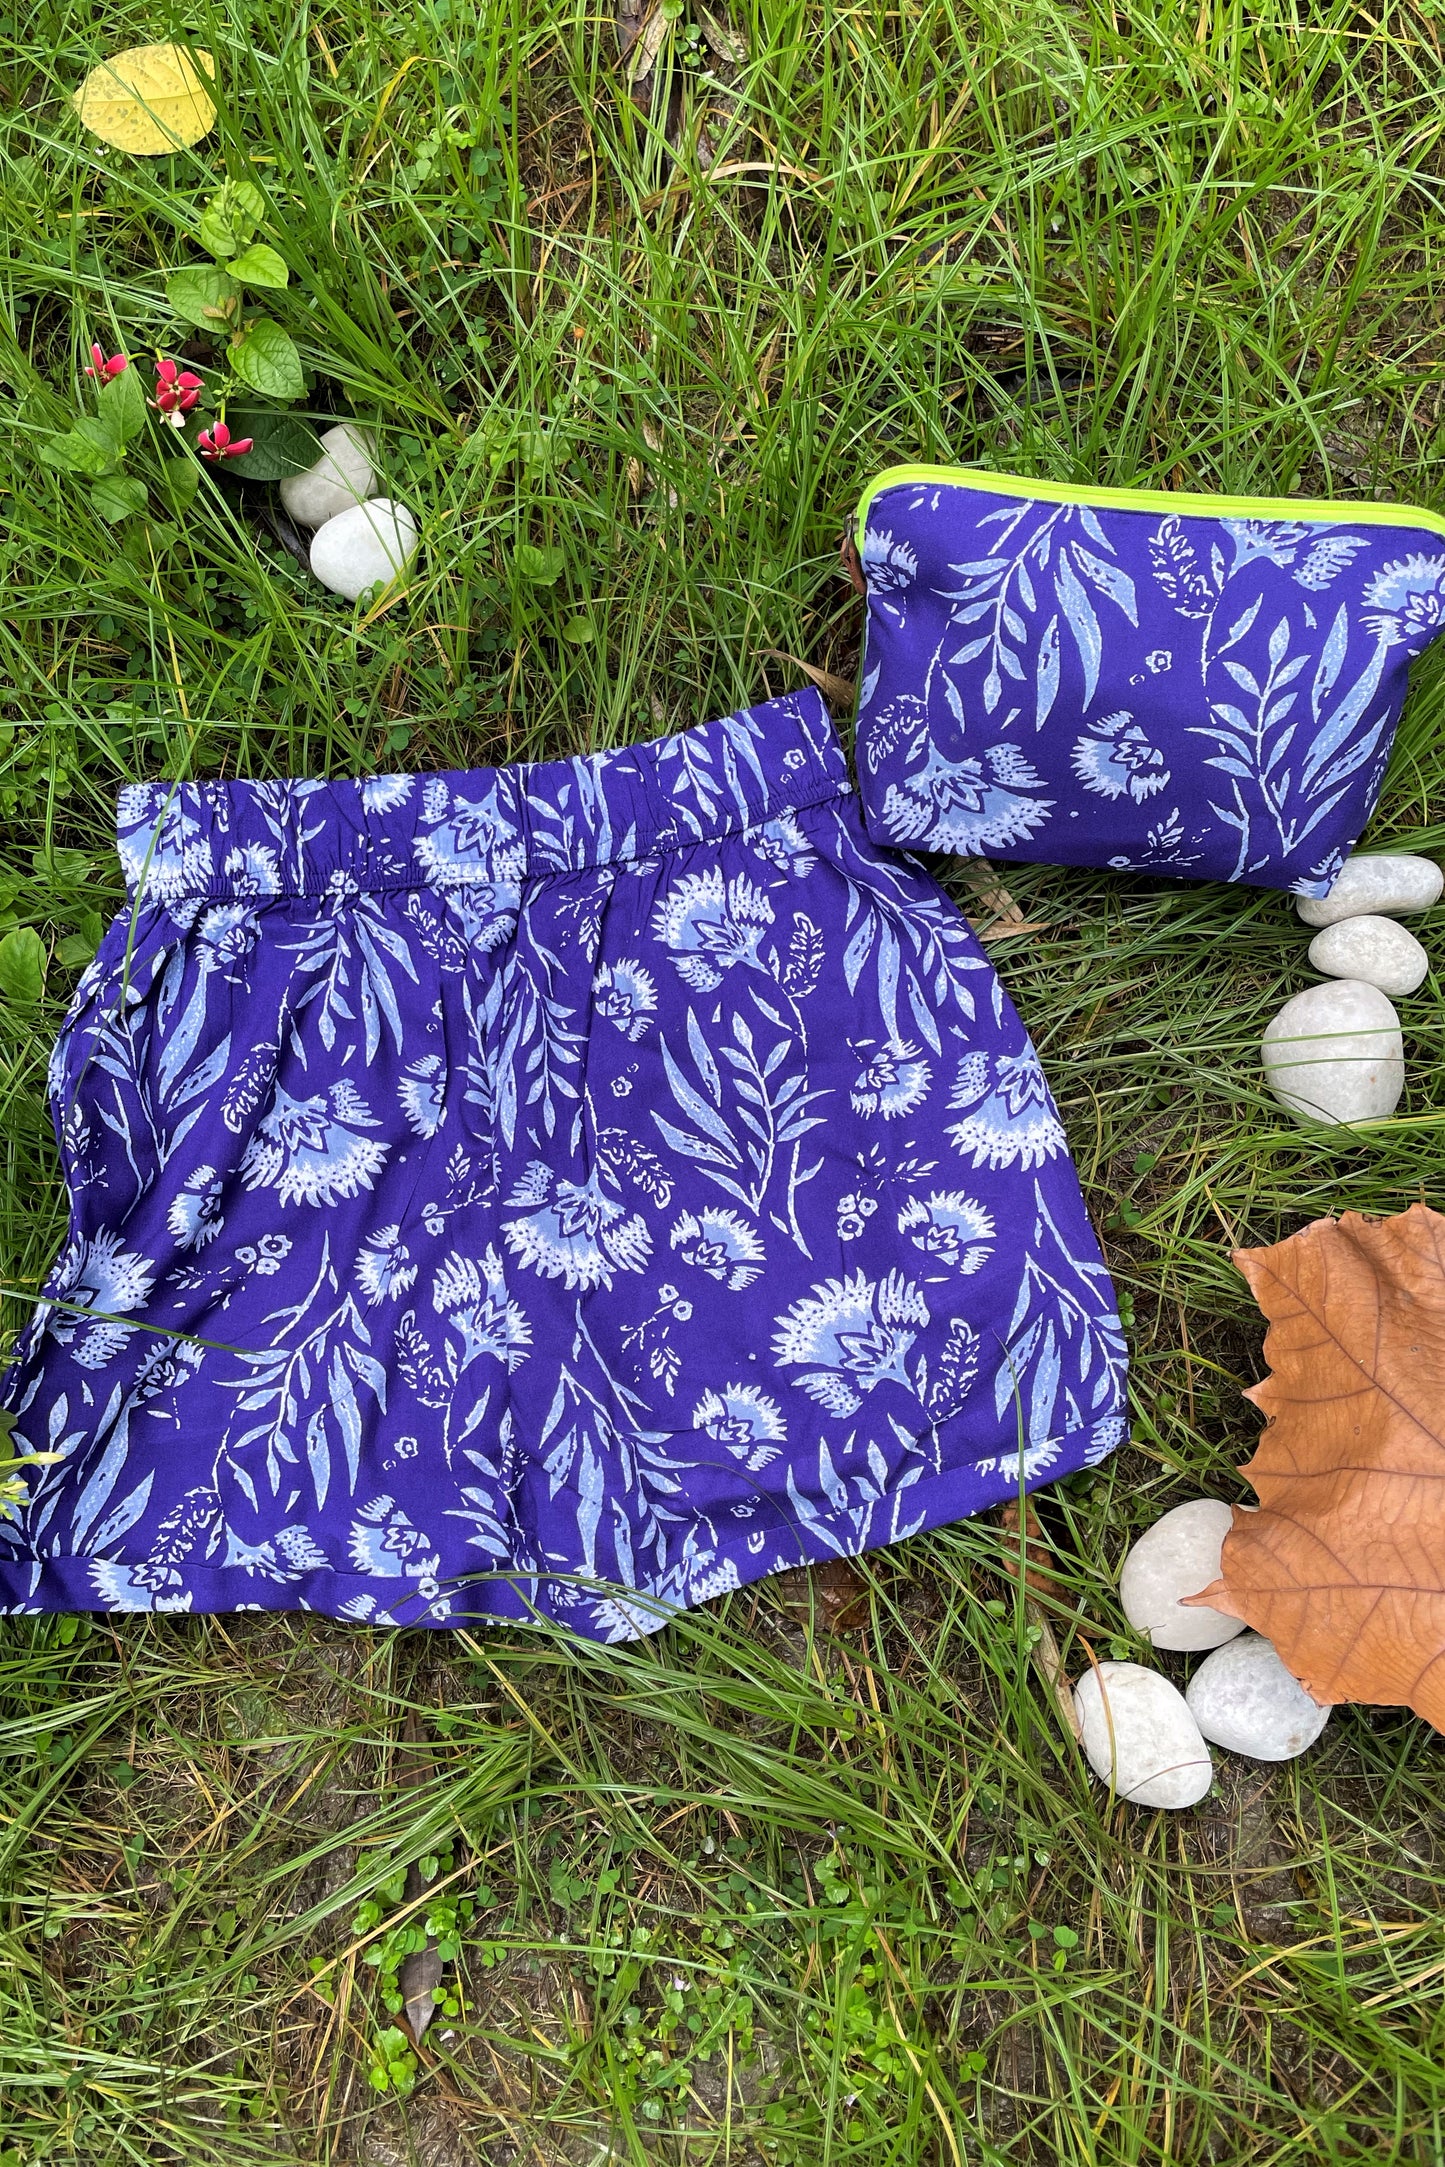 Women's Shorts & Cosmetic Pouch Set - Moroccan Blue